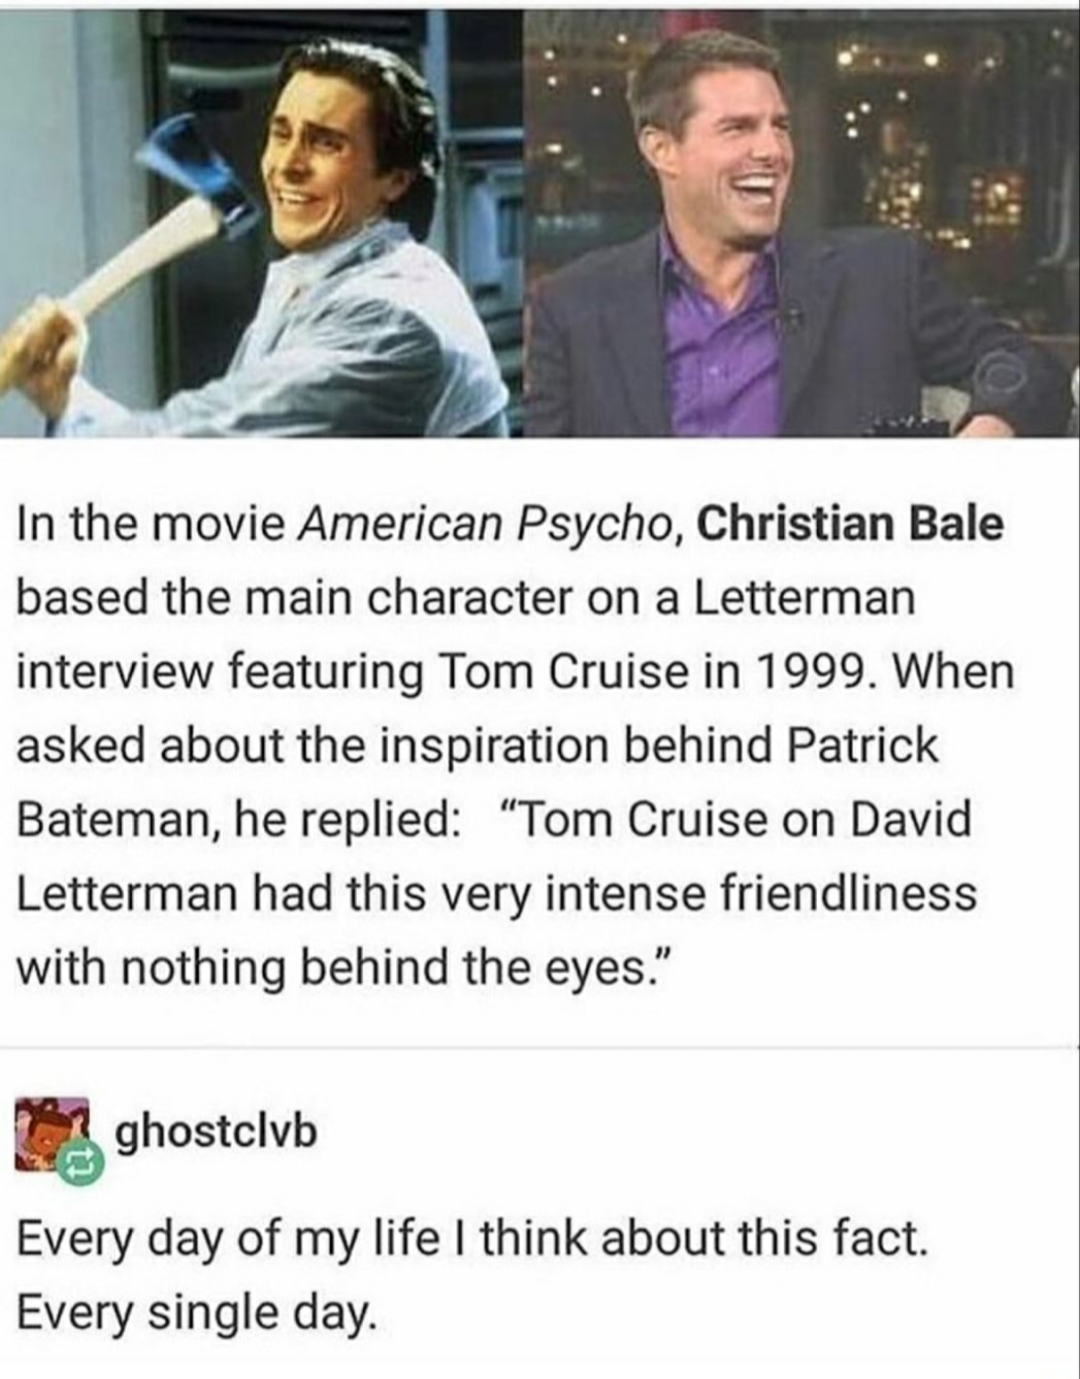 Tom+cruise+is+an+inspiration.